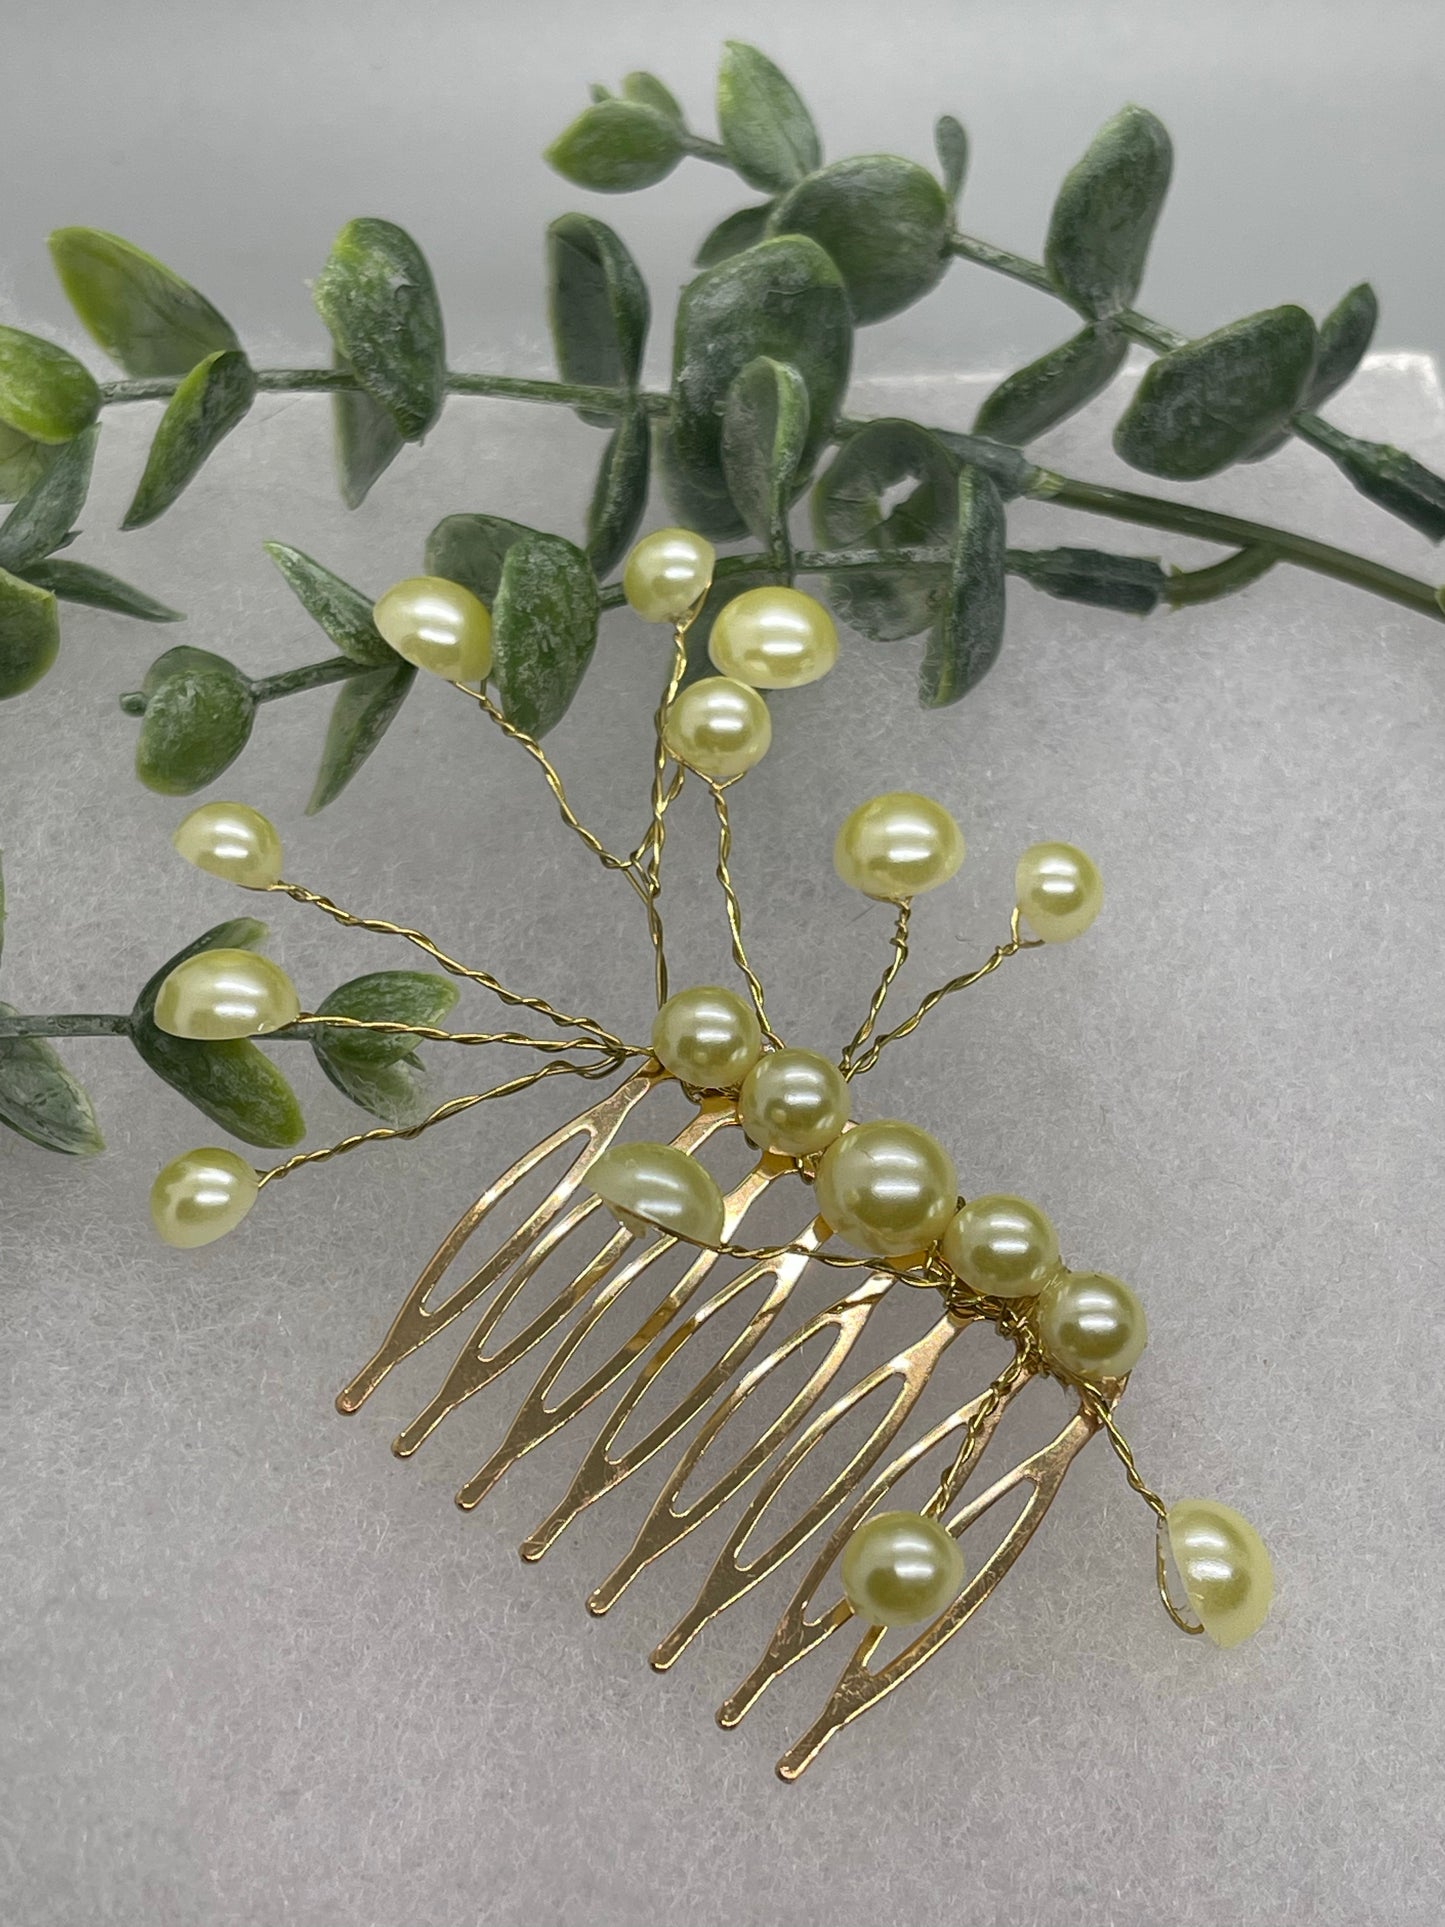 Yellow faux Pearl 2.0” gold tone bridal side Comb accents vine handmade by hairdazzzel wedding accessory bride